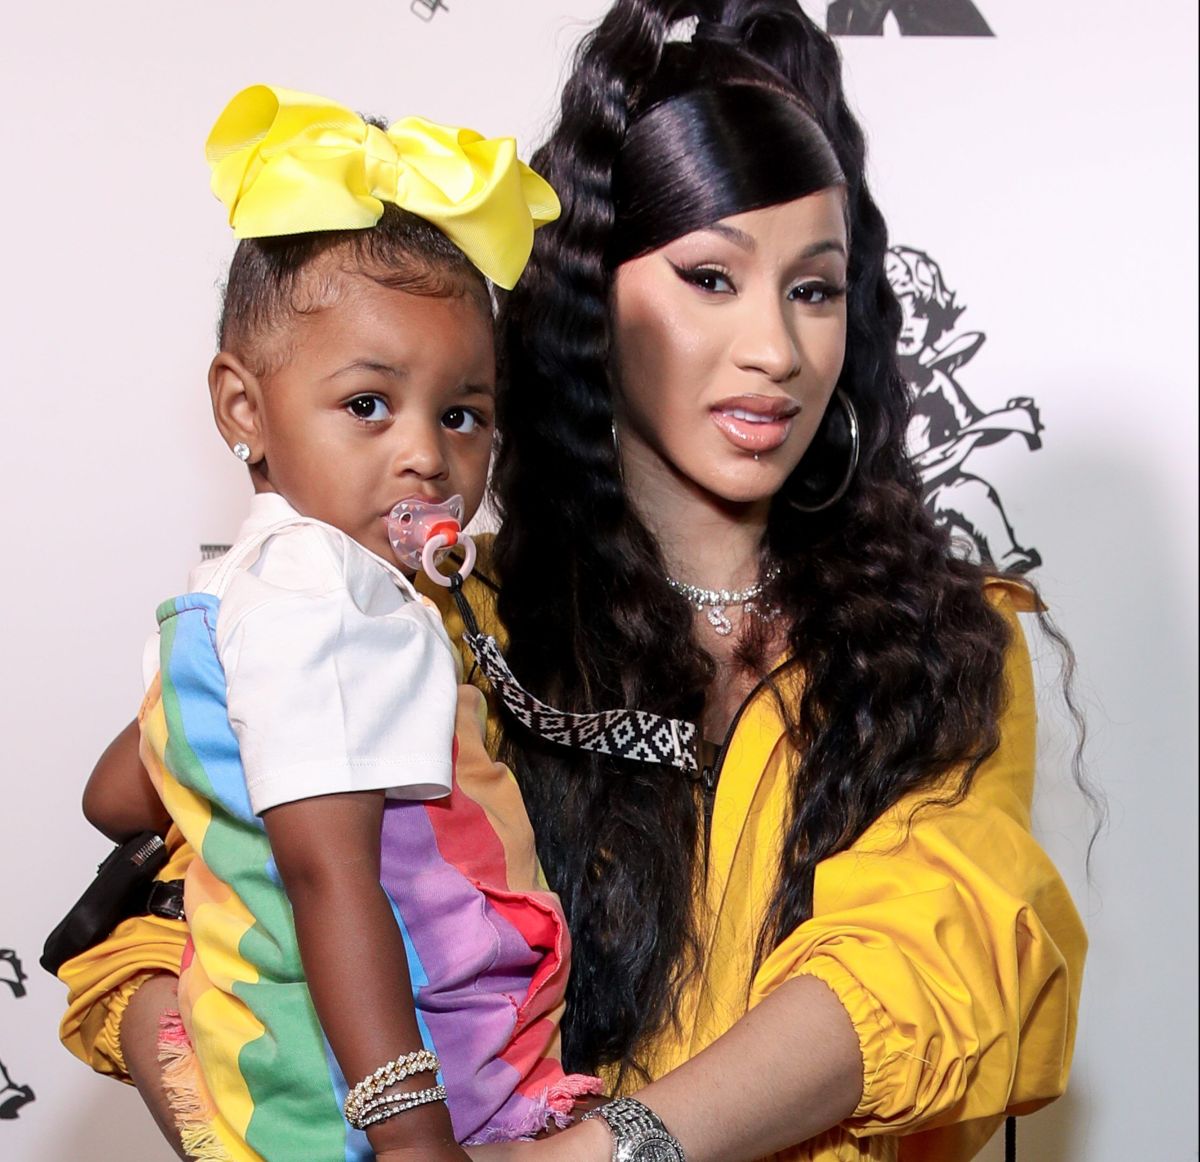 BEVERLY HILLS, CALIFORNIA - JUNE 17: Kulture Kiari Cephus and Cardi B attend the Teyana Taylor "The Album" Listening Party on June 17, 2020 in Beverly Hills, California. (Photo by Rich Fury/Getty Images for Def Jam Recordings)